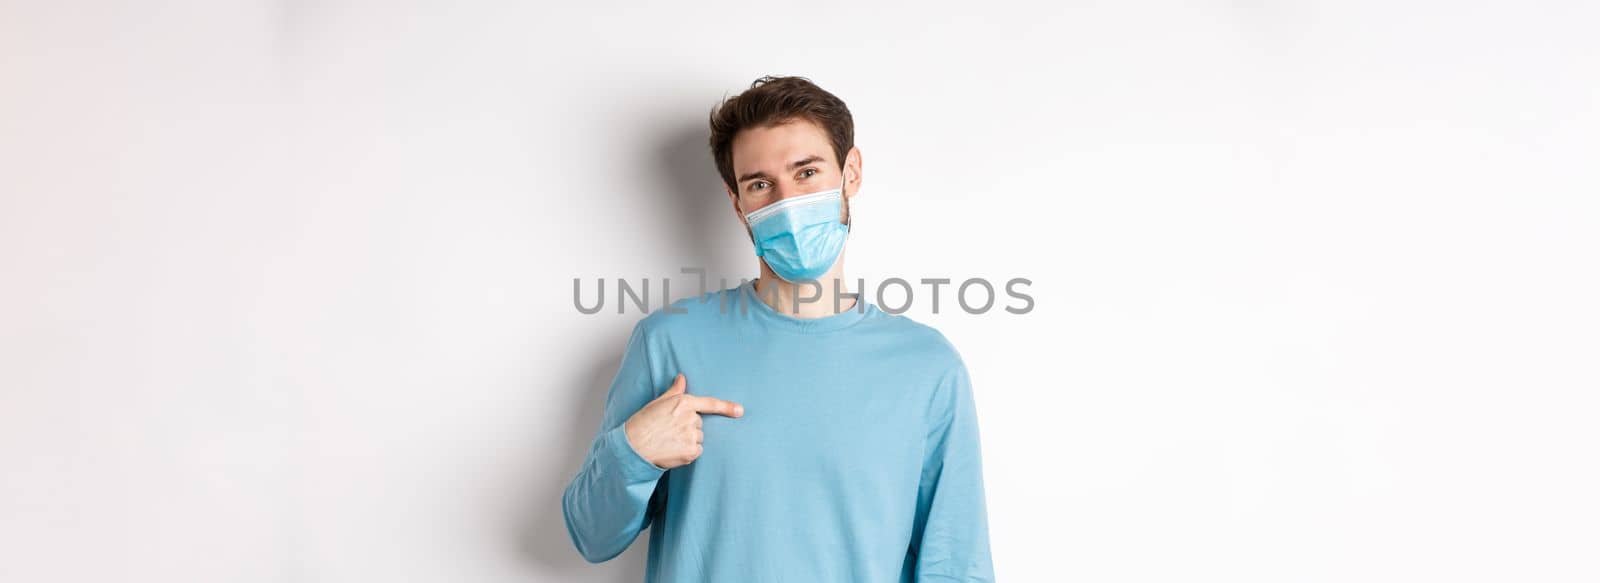 Covid-19, health and quarantine concept. Smiling caucasian man in medical mask pointing at himself, volunteering, standing over white background.